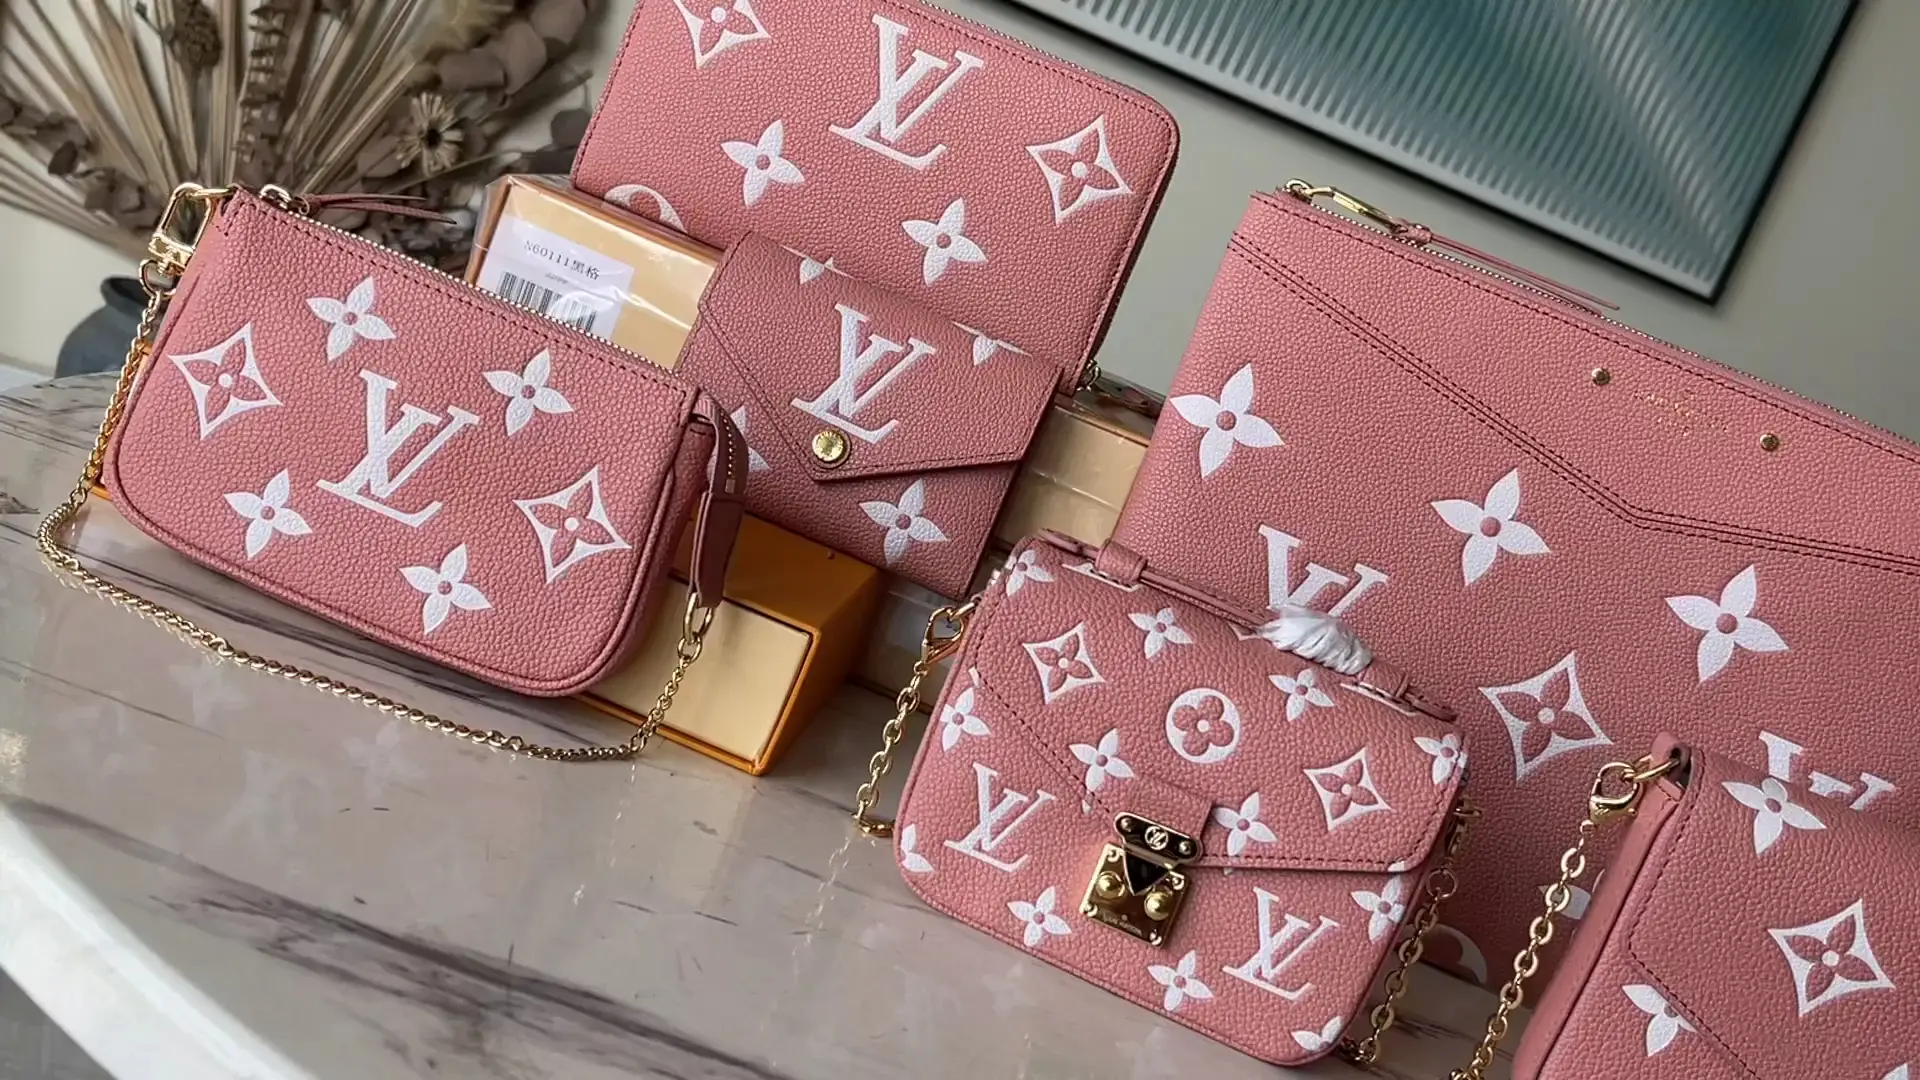 My Last Dhgate Unboxing for Now: Nice BB Vanity and Multi Pochette